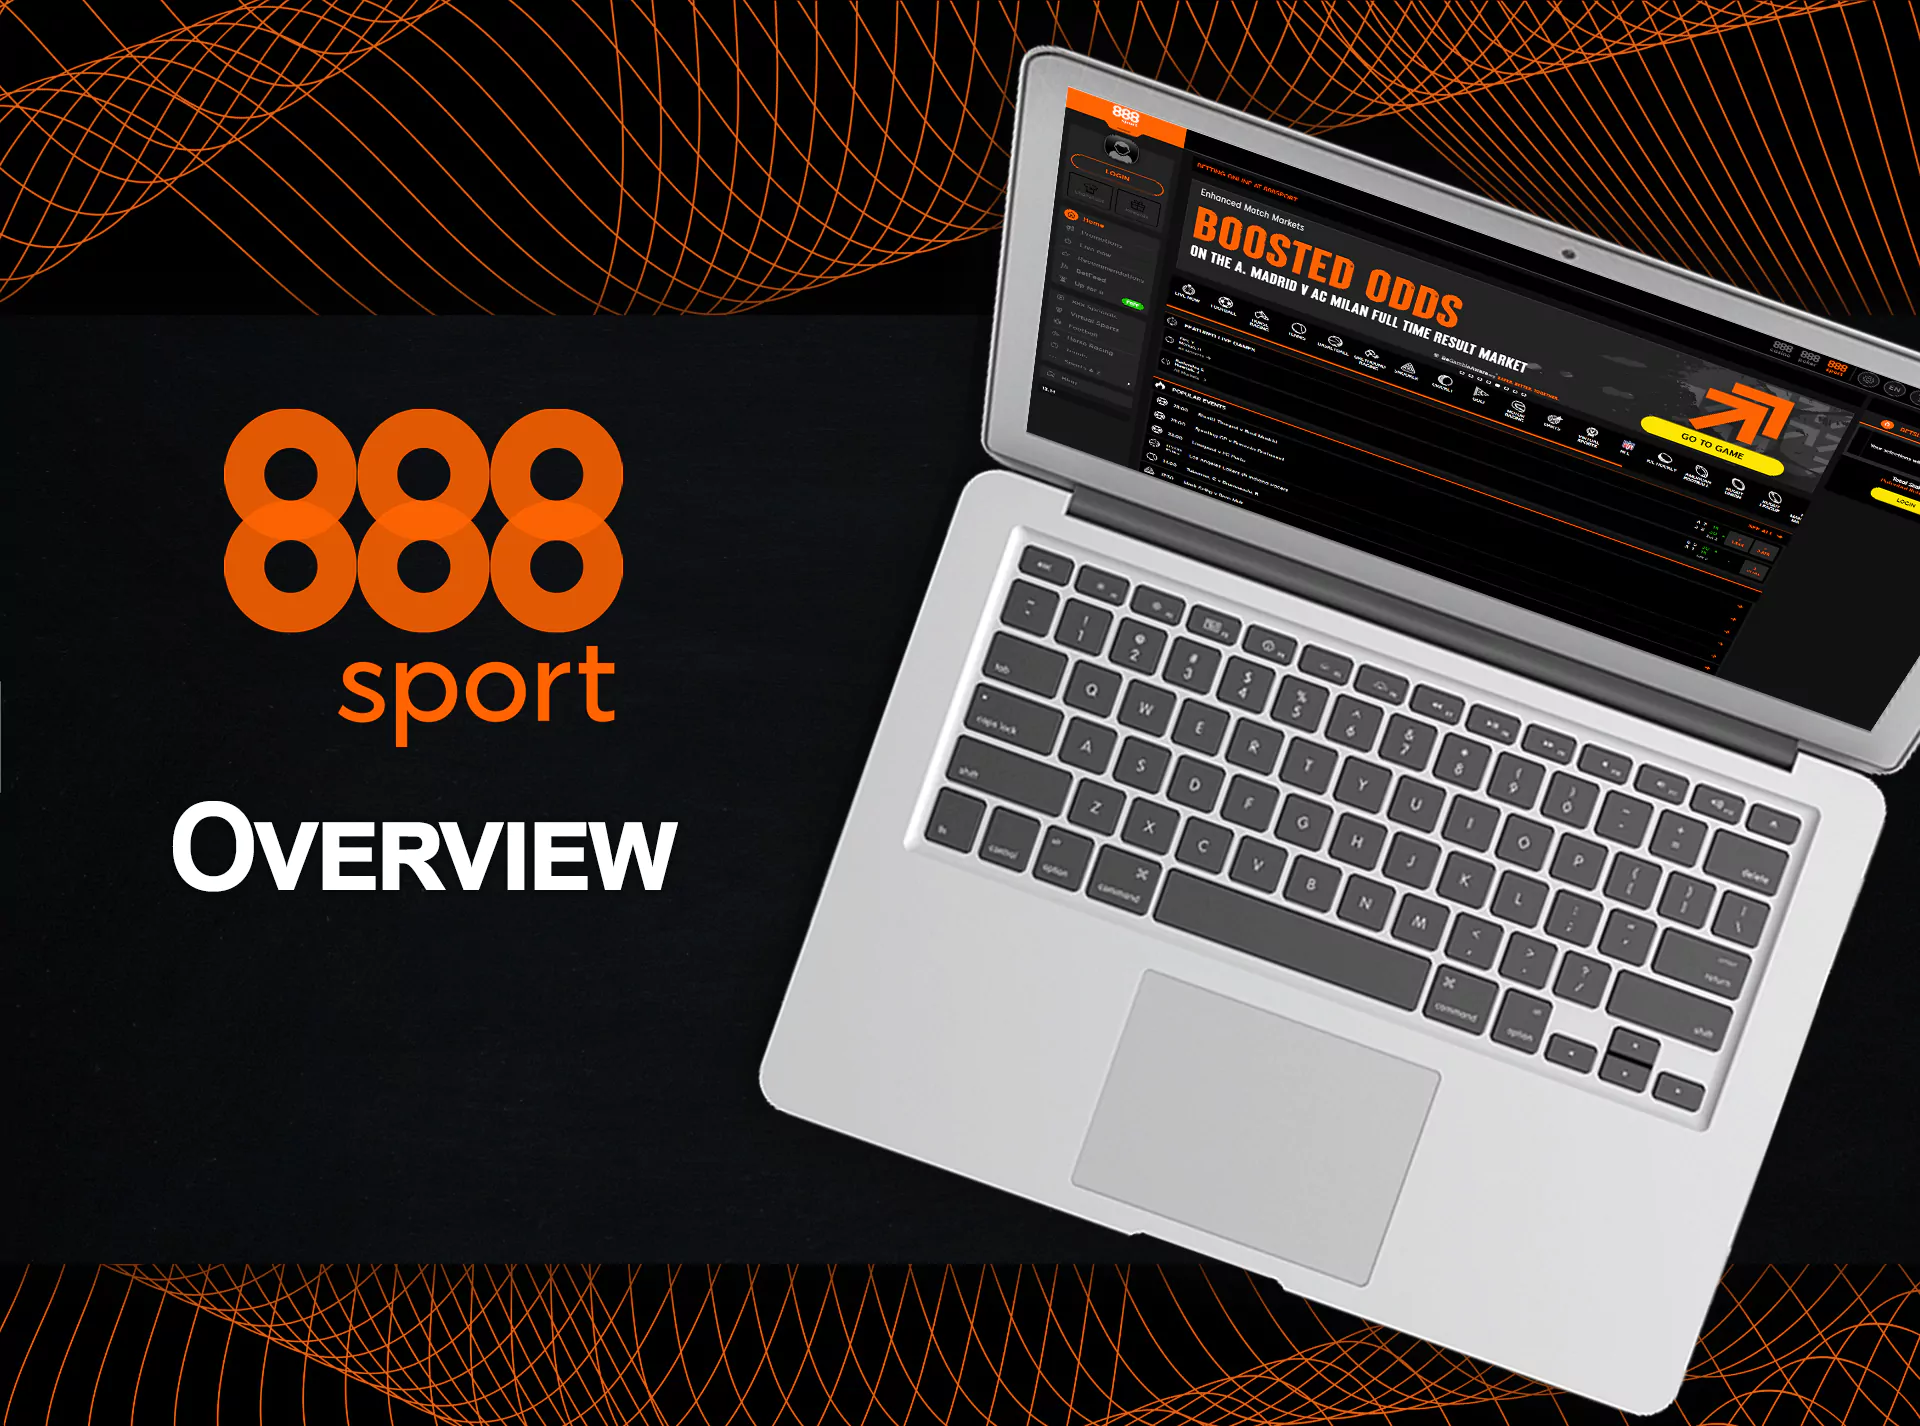 888sport has been providing betting services since 2008.